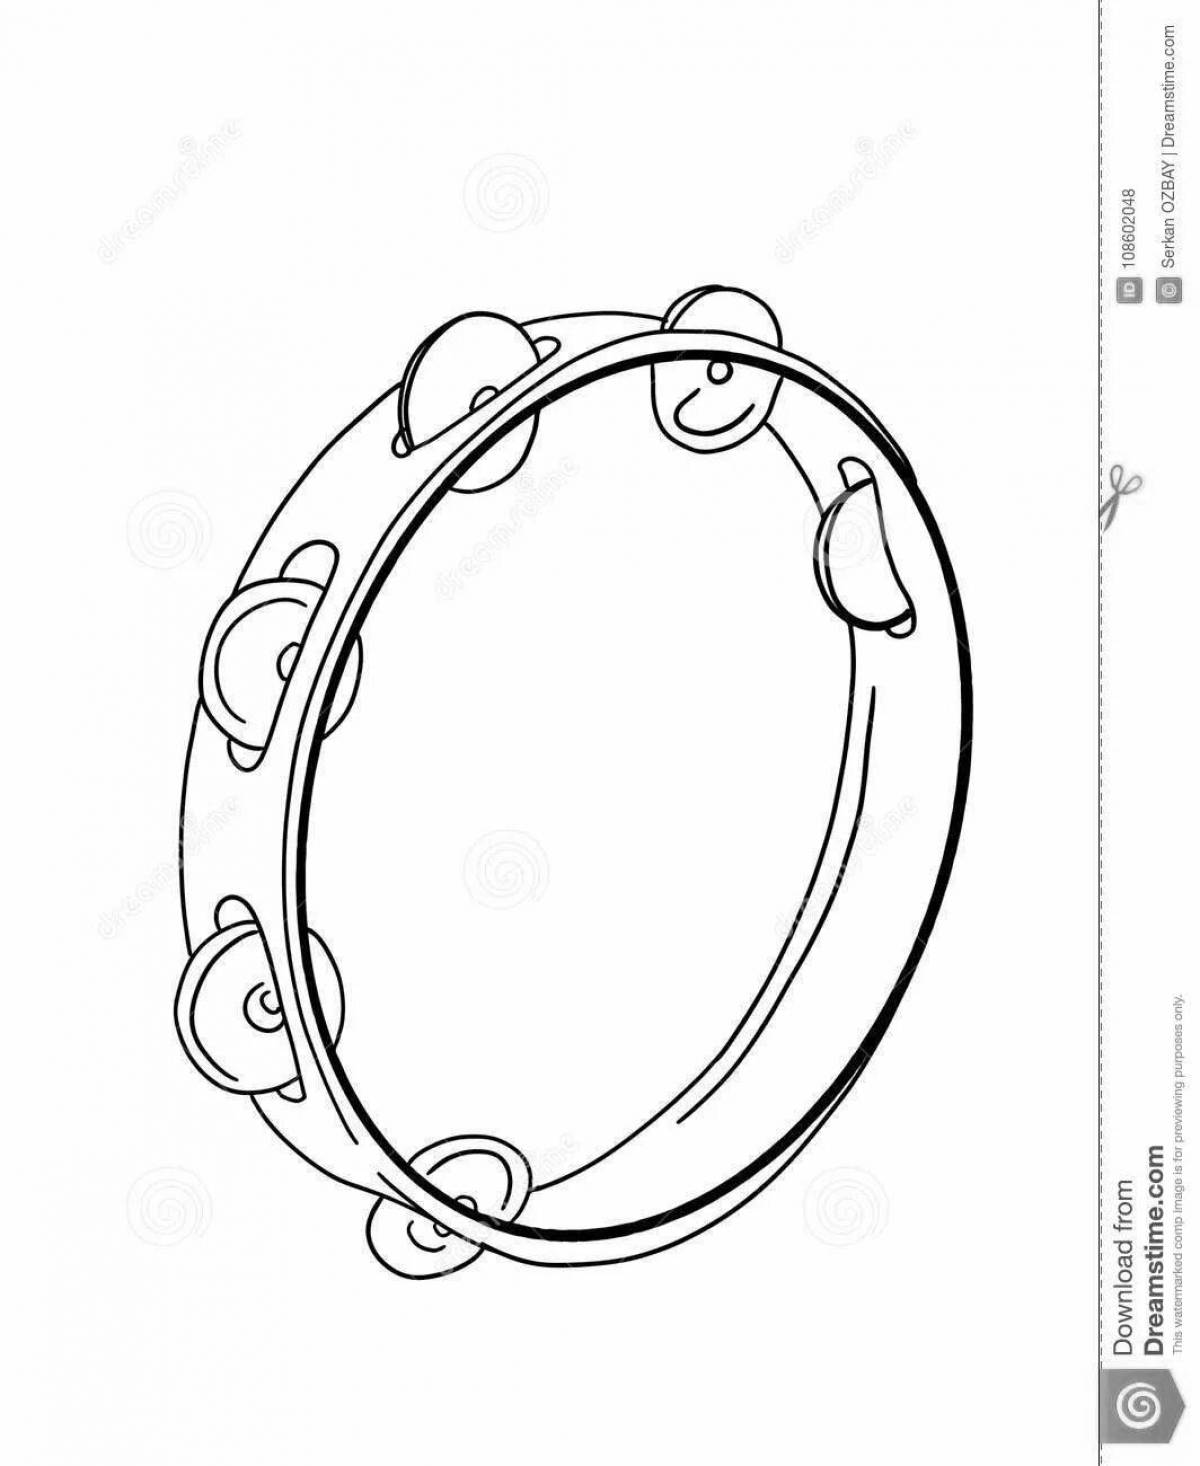 Shiny Tambourine Coloring Page for Babies